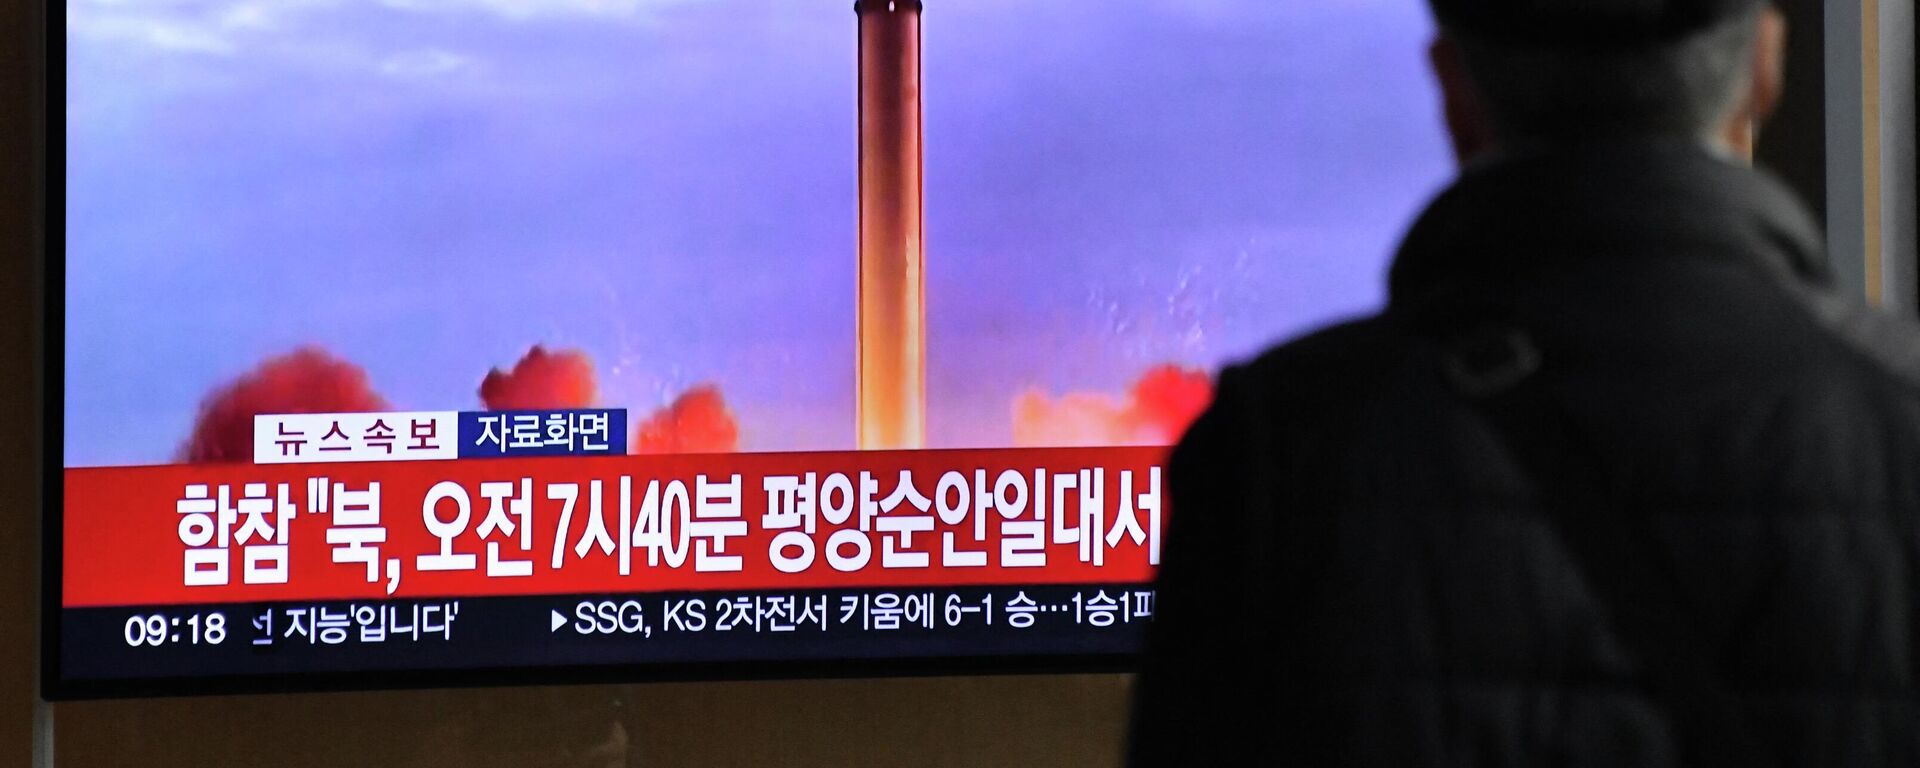 A man watches a television screen showing a news broadcast with file footage of a North Korean missile test, at a railway station in Seoul on November 3, 2022 - Sputnik International, 1920, 18.11.2022